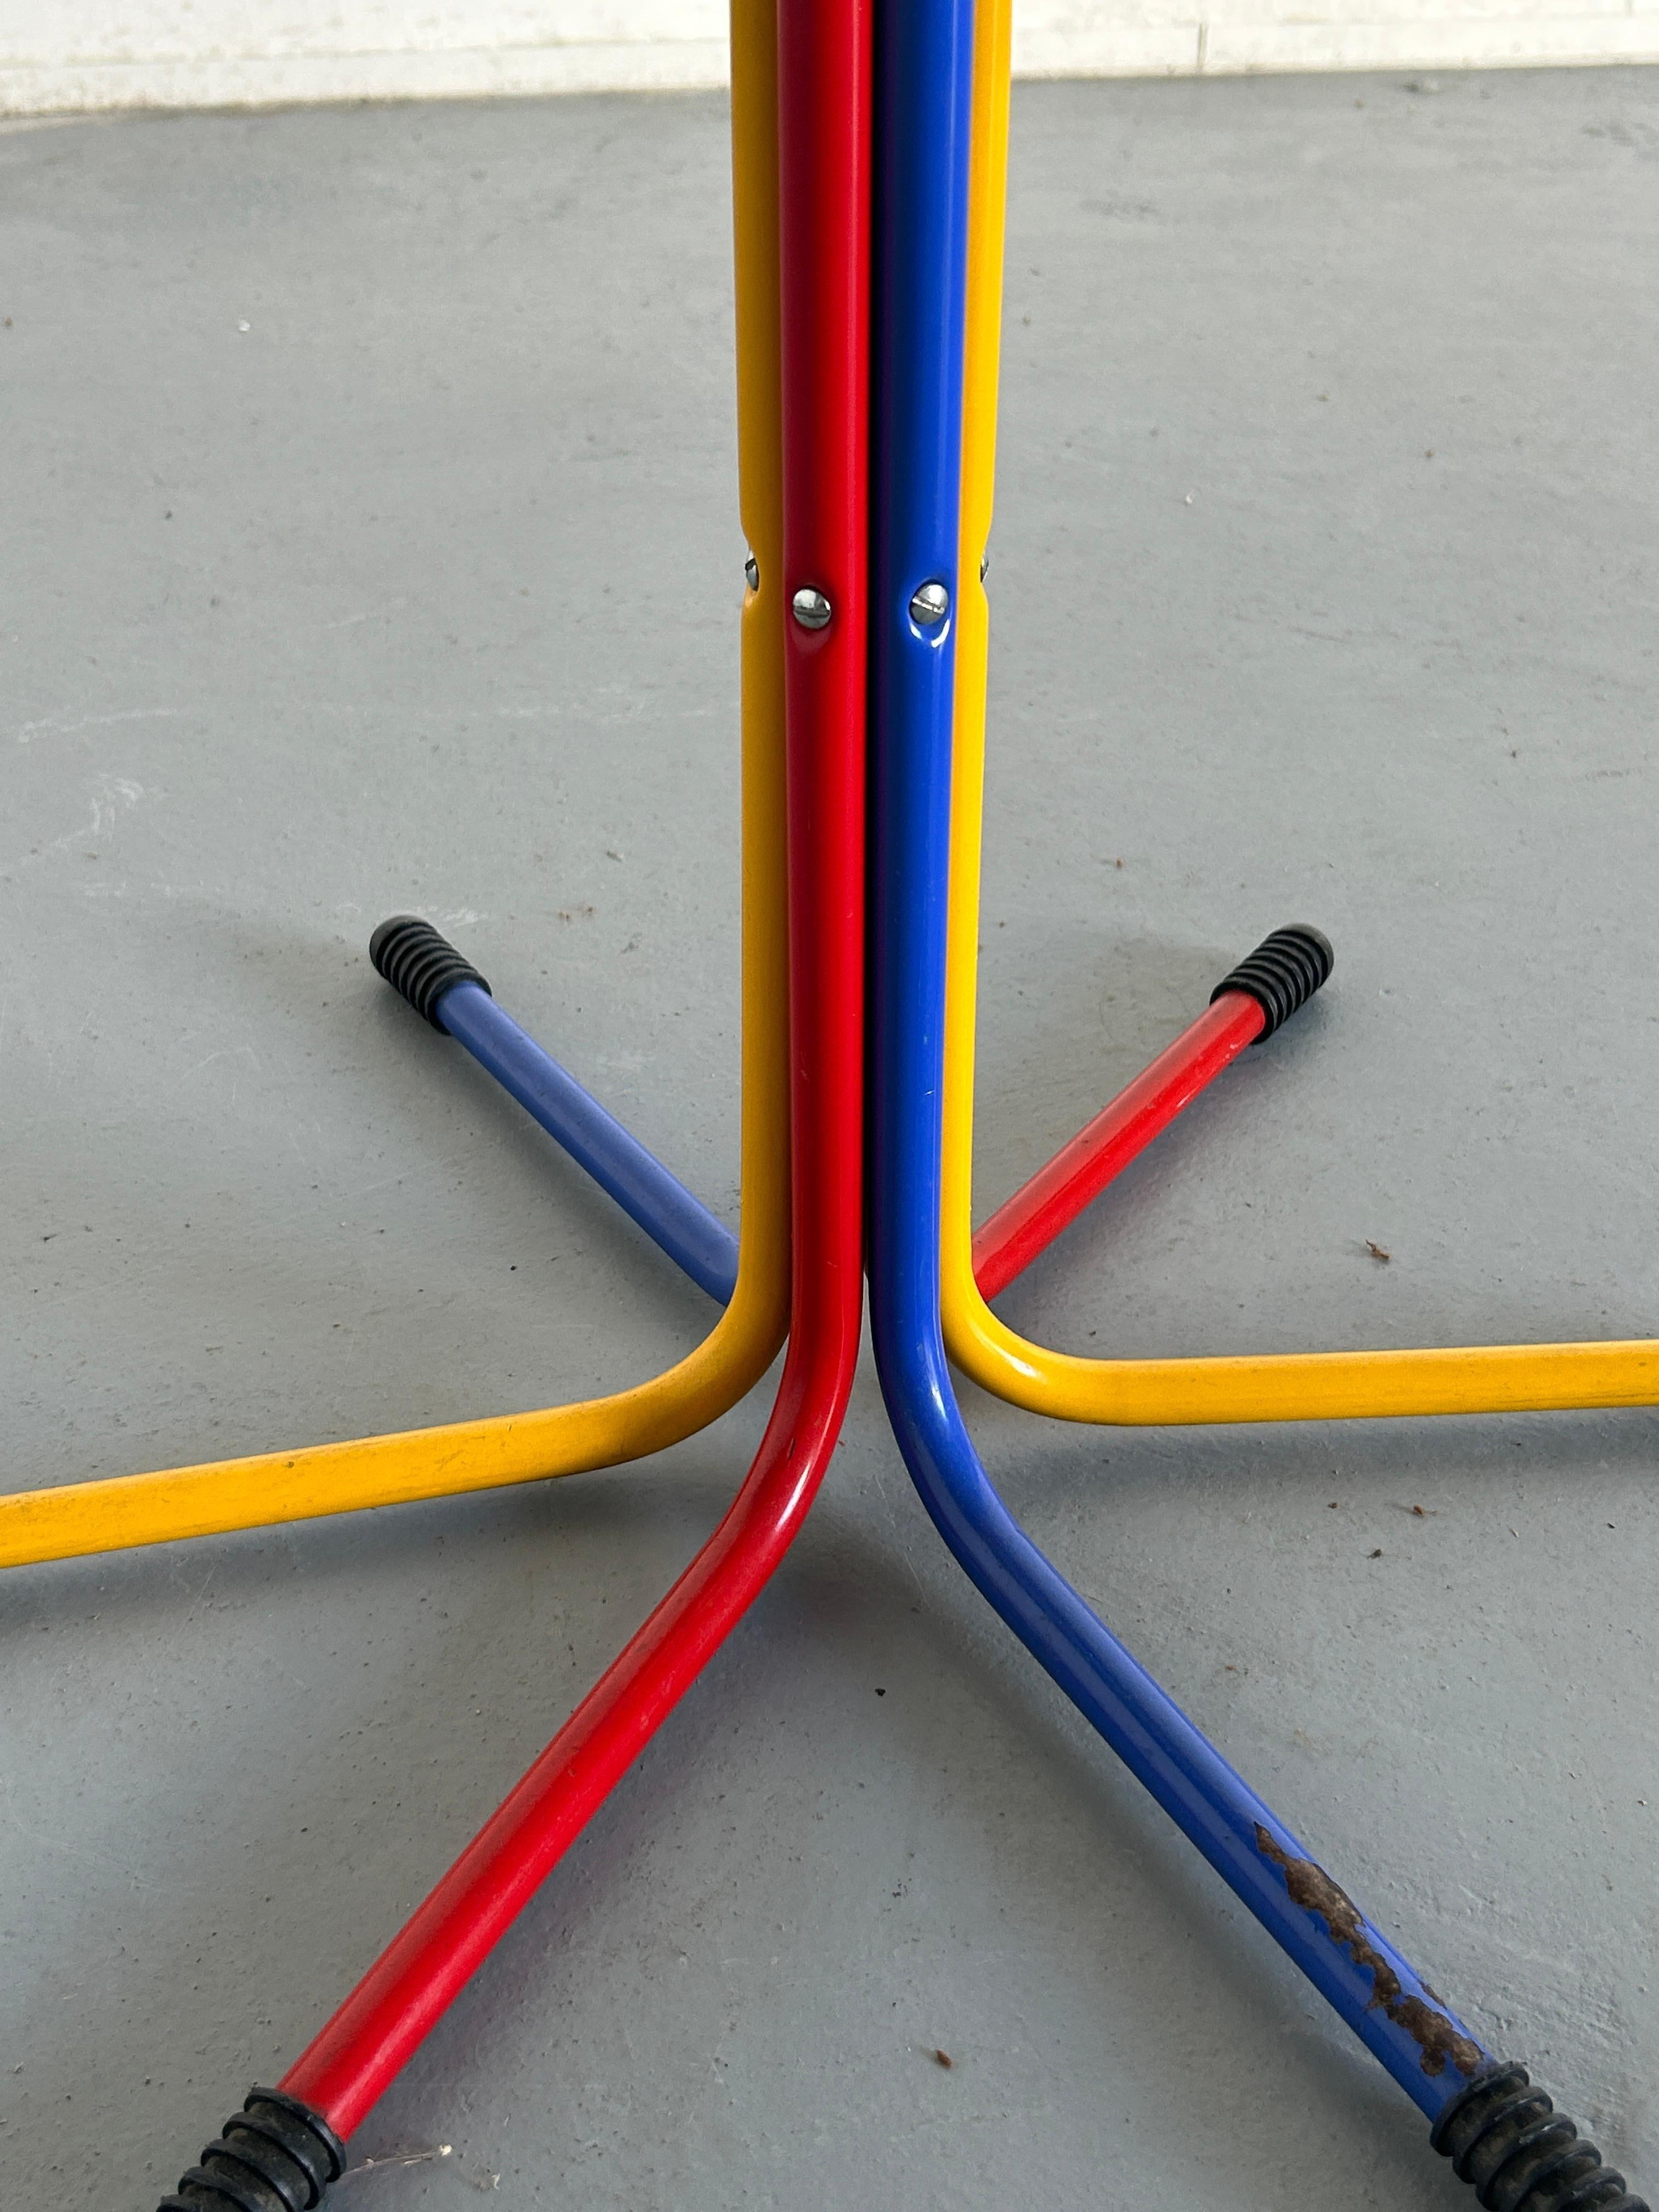 Swedish Vintage Colourful Bent Metal RIGG Coat Stand by Tord Bjorklund for Ikea, 1987